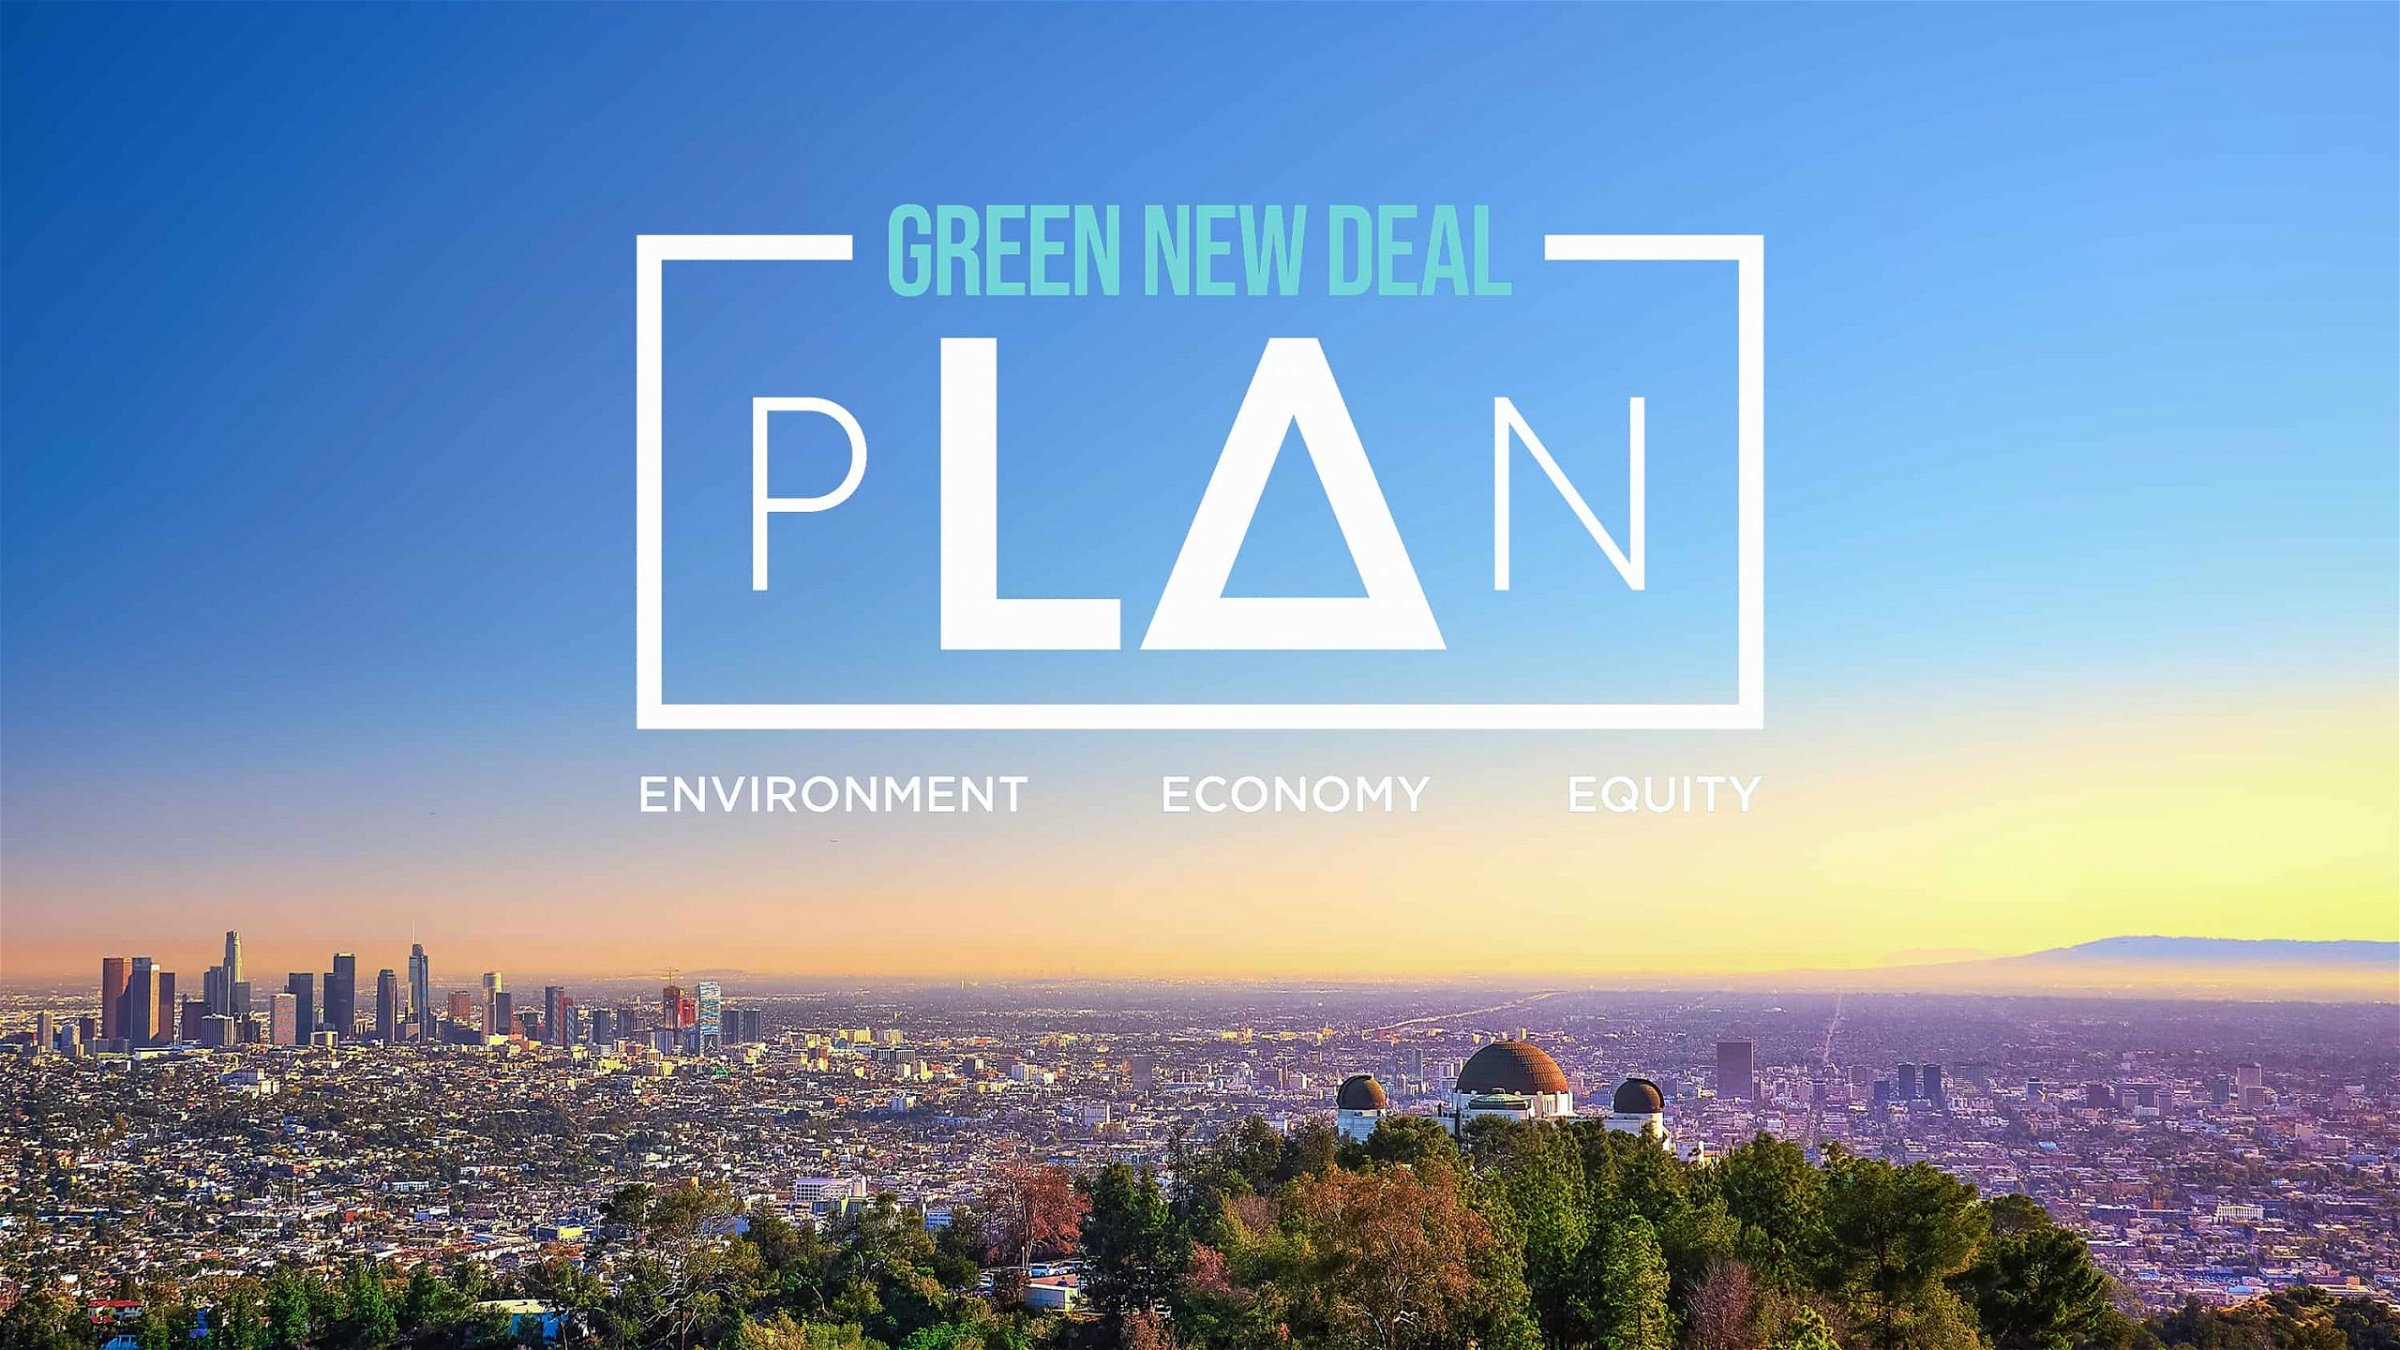 LA’s Green New Deal Launched This Week